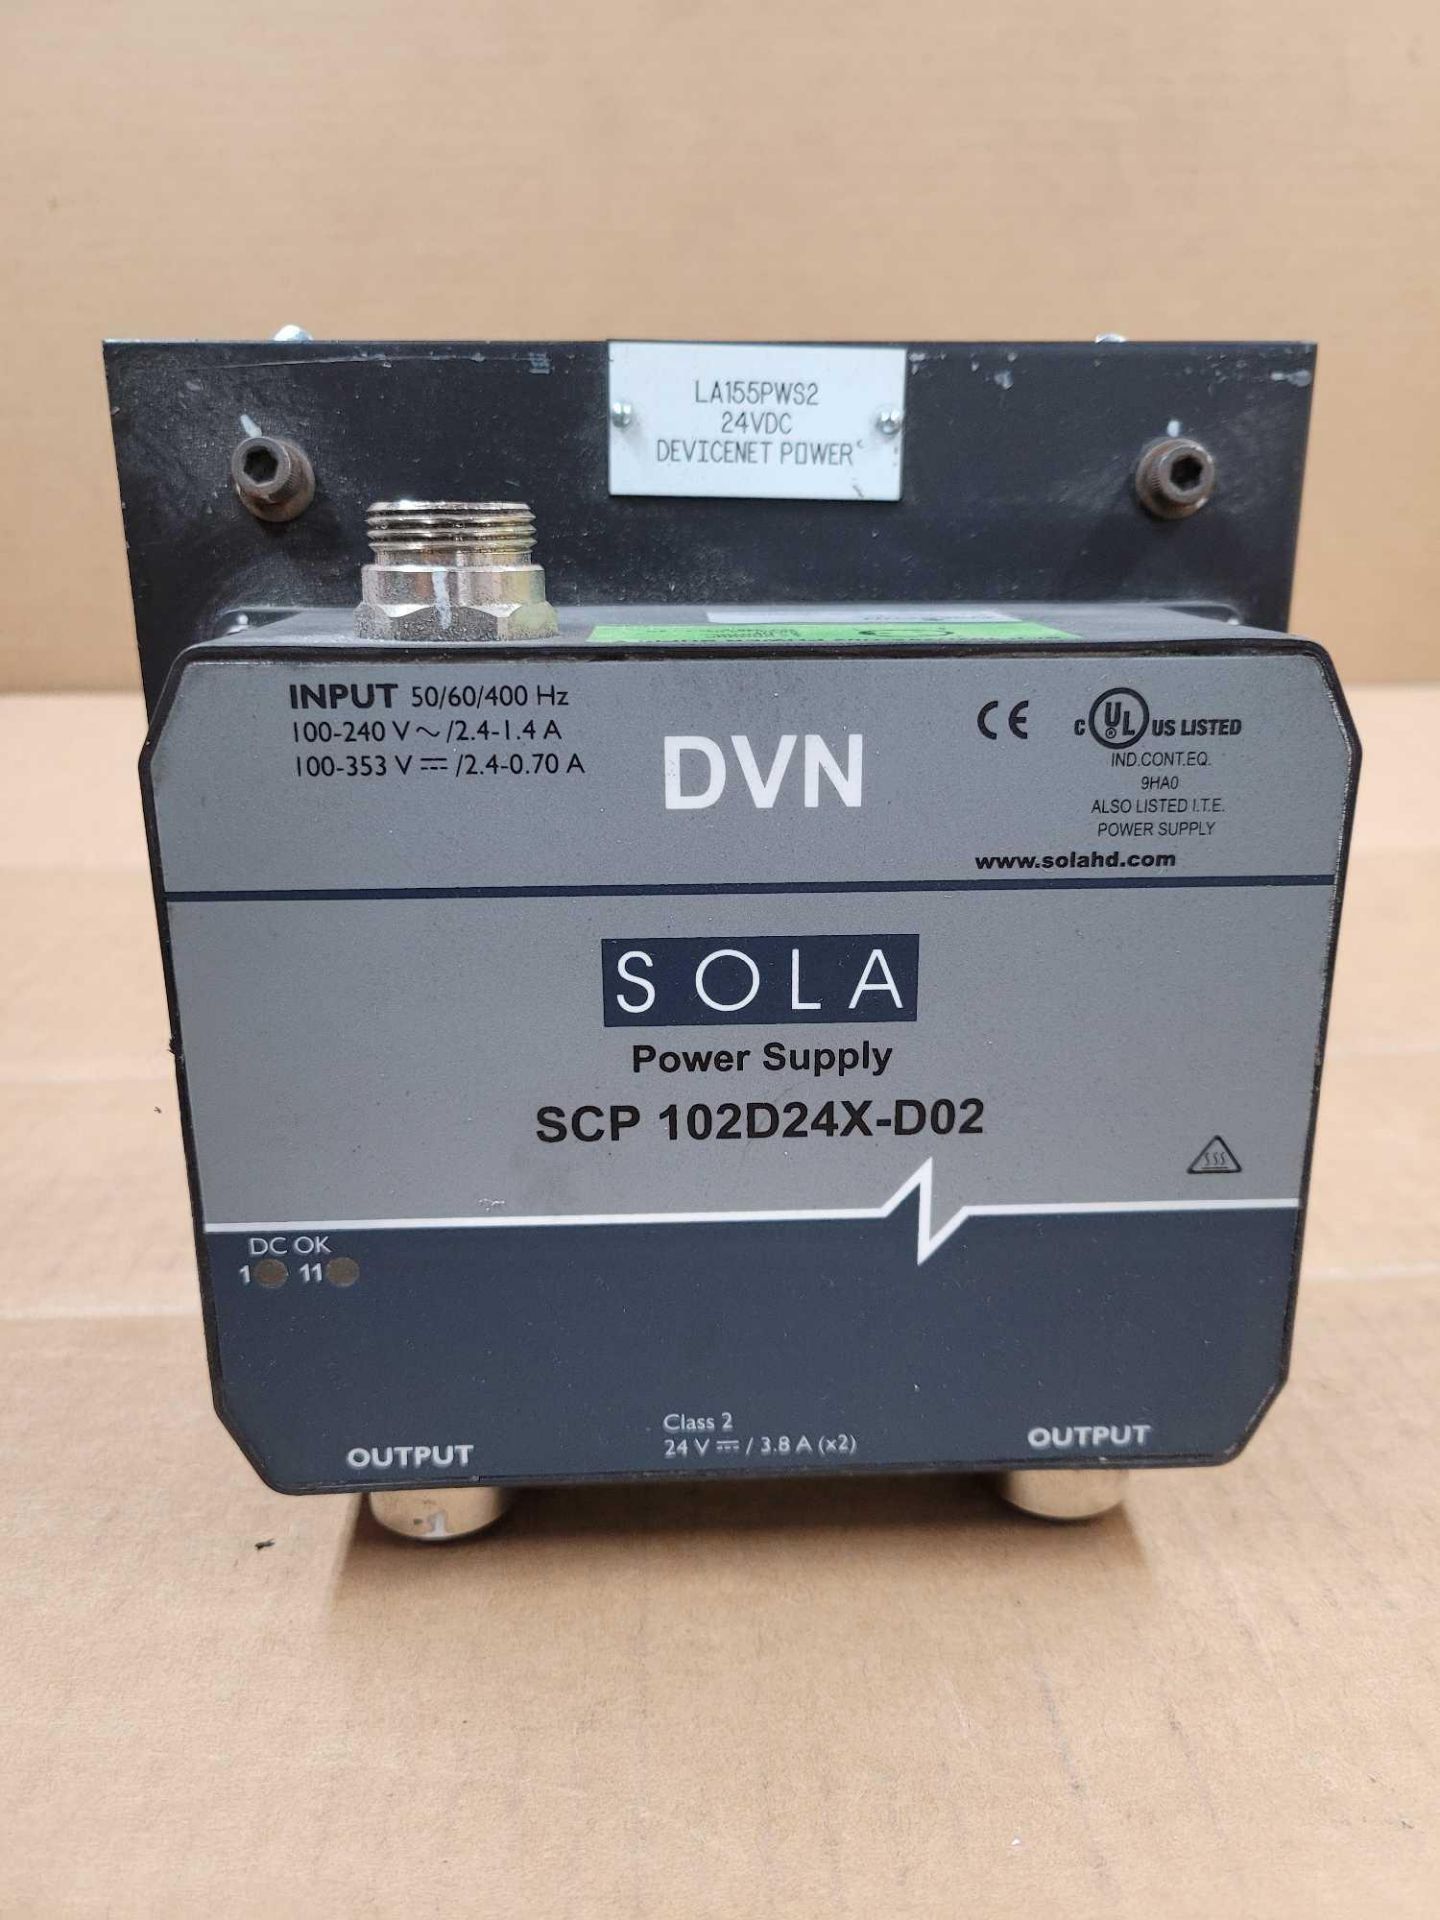 LOT OF 2 SOLA SCP 102D24X-D02 / Power Supply  /  Lot Weight: 12.4 lbs - Image 2 of 8